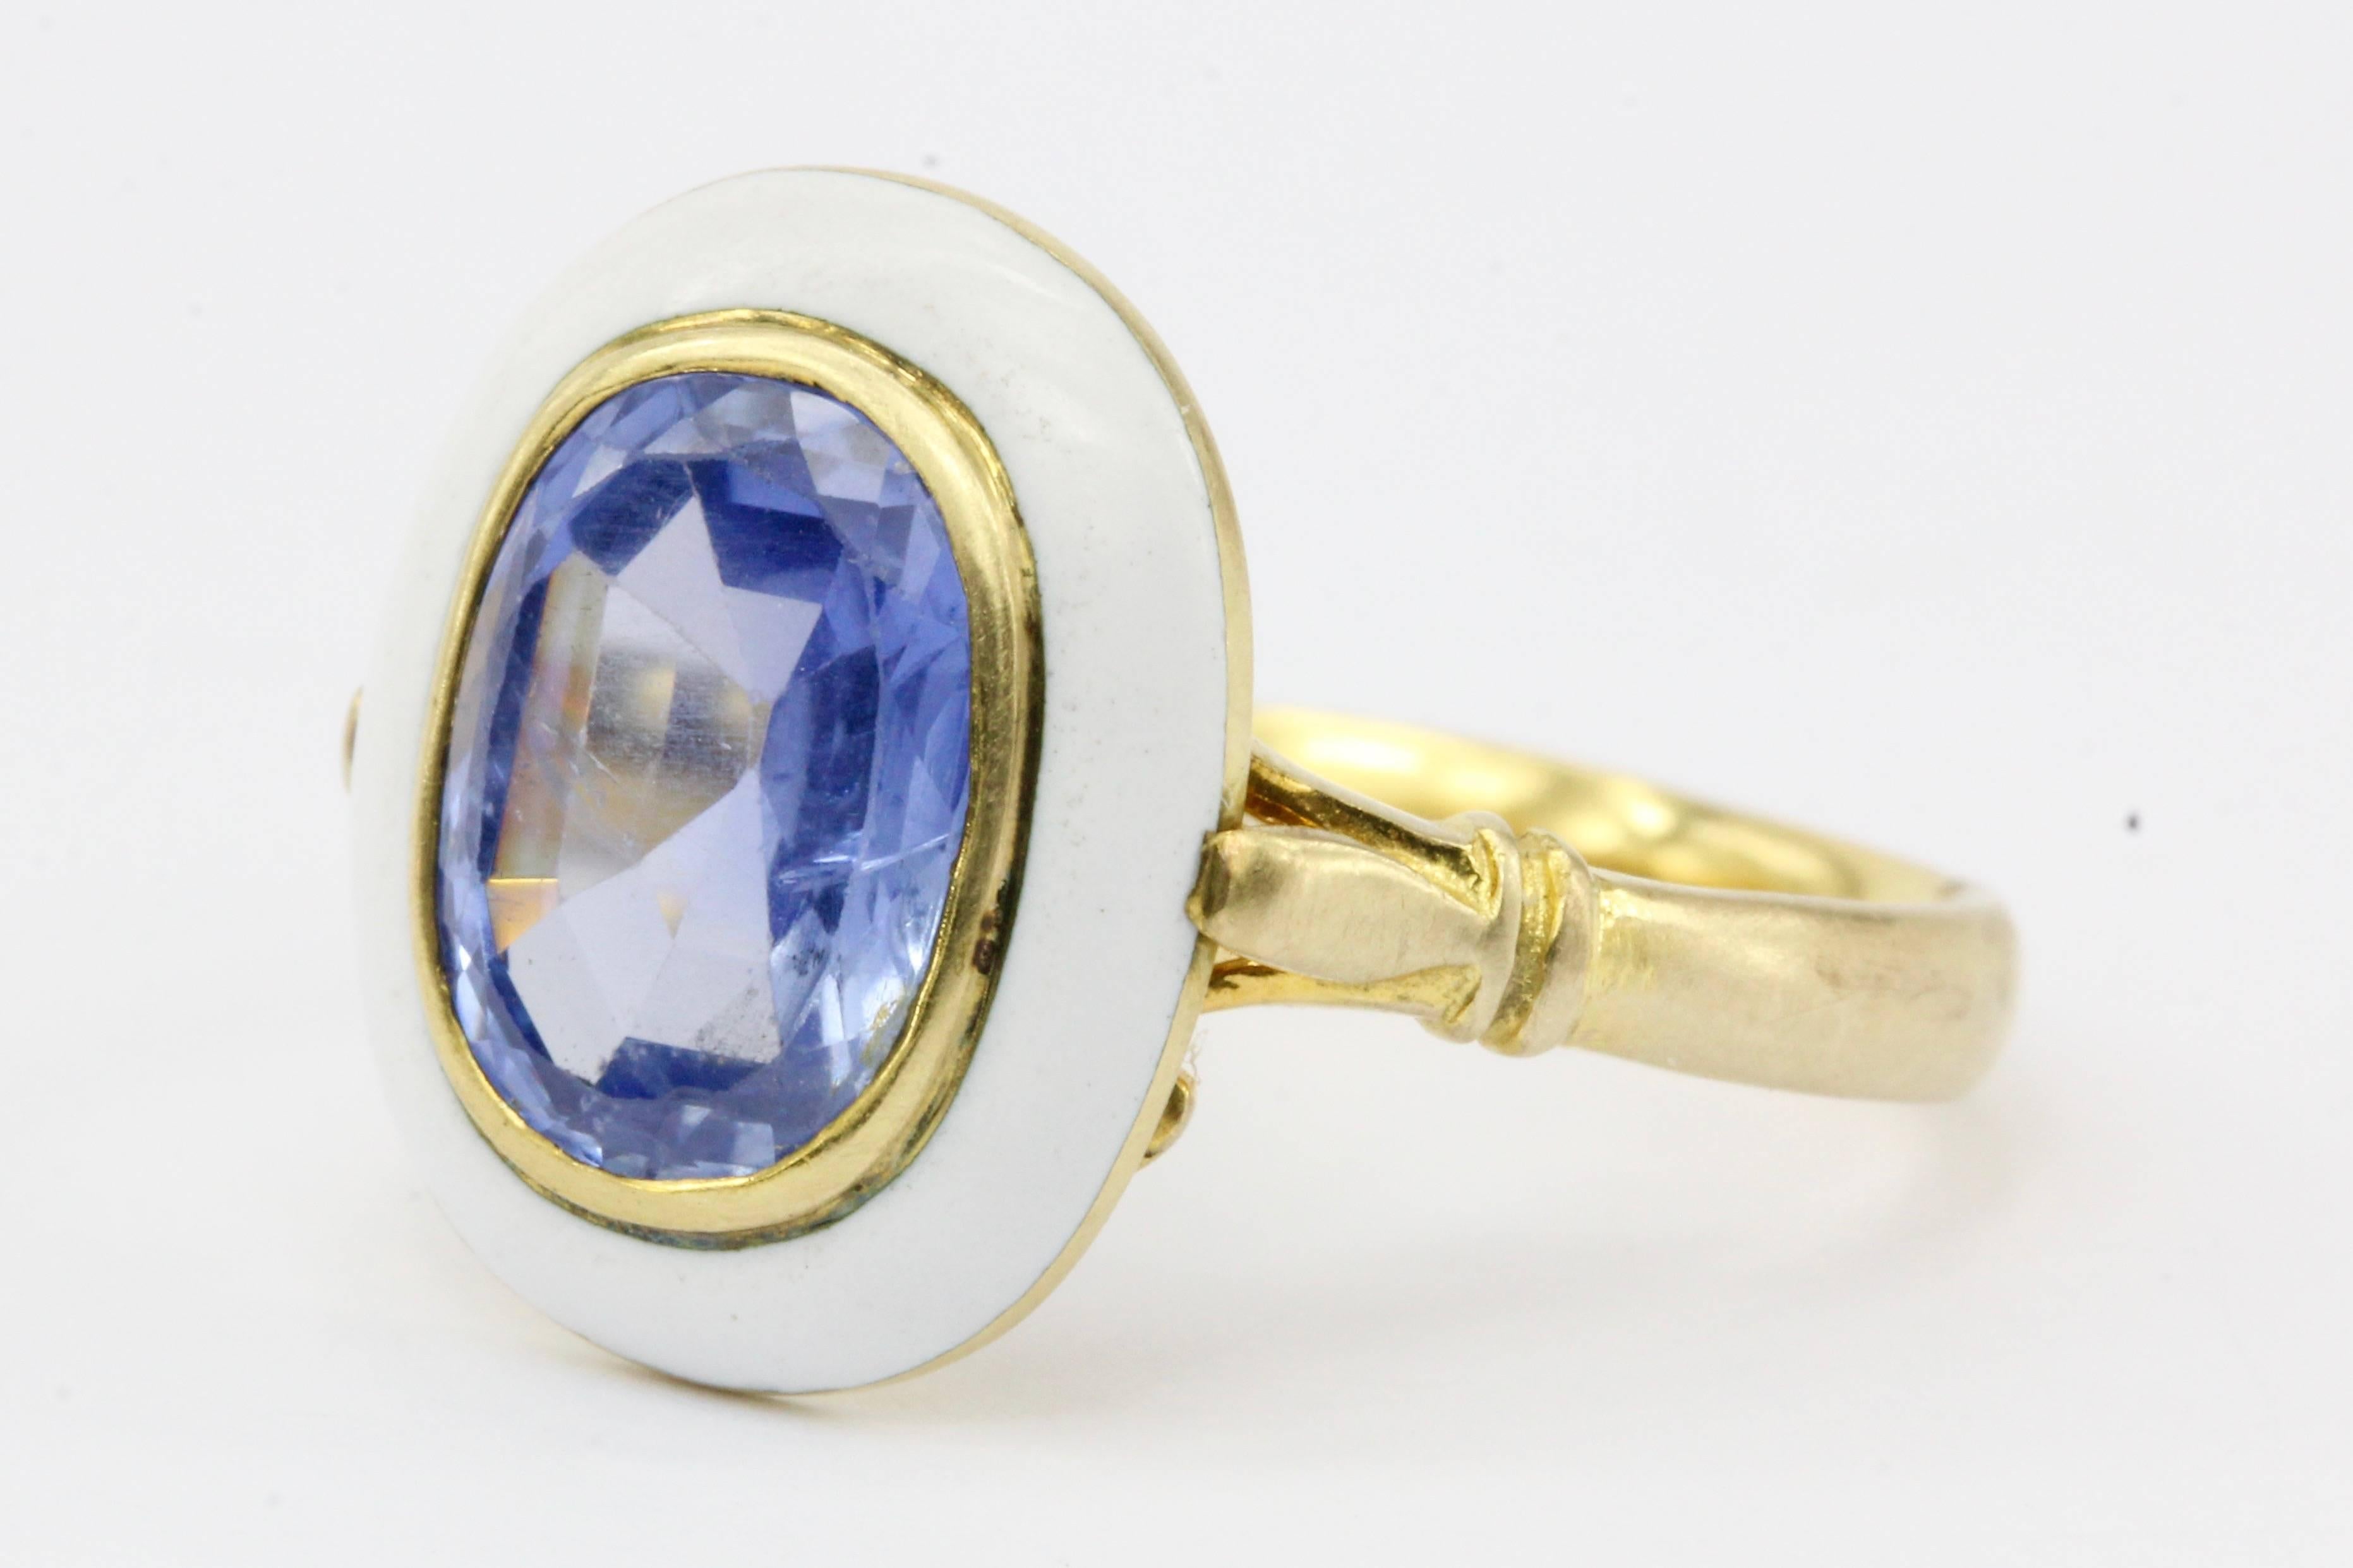 Era: Late Victorian

Composition: 10k Yellow Gold w/ White Enamel

Primary Stone: Natural untreated Blue Burma Sapphire

Stone Carat: Approximately 2.1 carat 

Dimensions: 9.58 x 7.09. 3.84mm

Color / Clarity: Violetish Blue / Transparent

Shape: